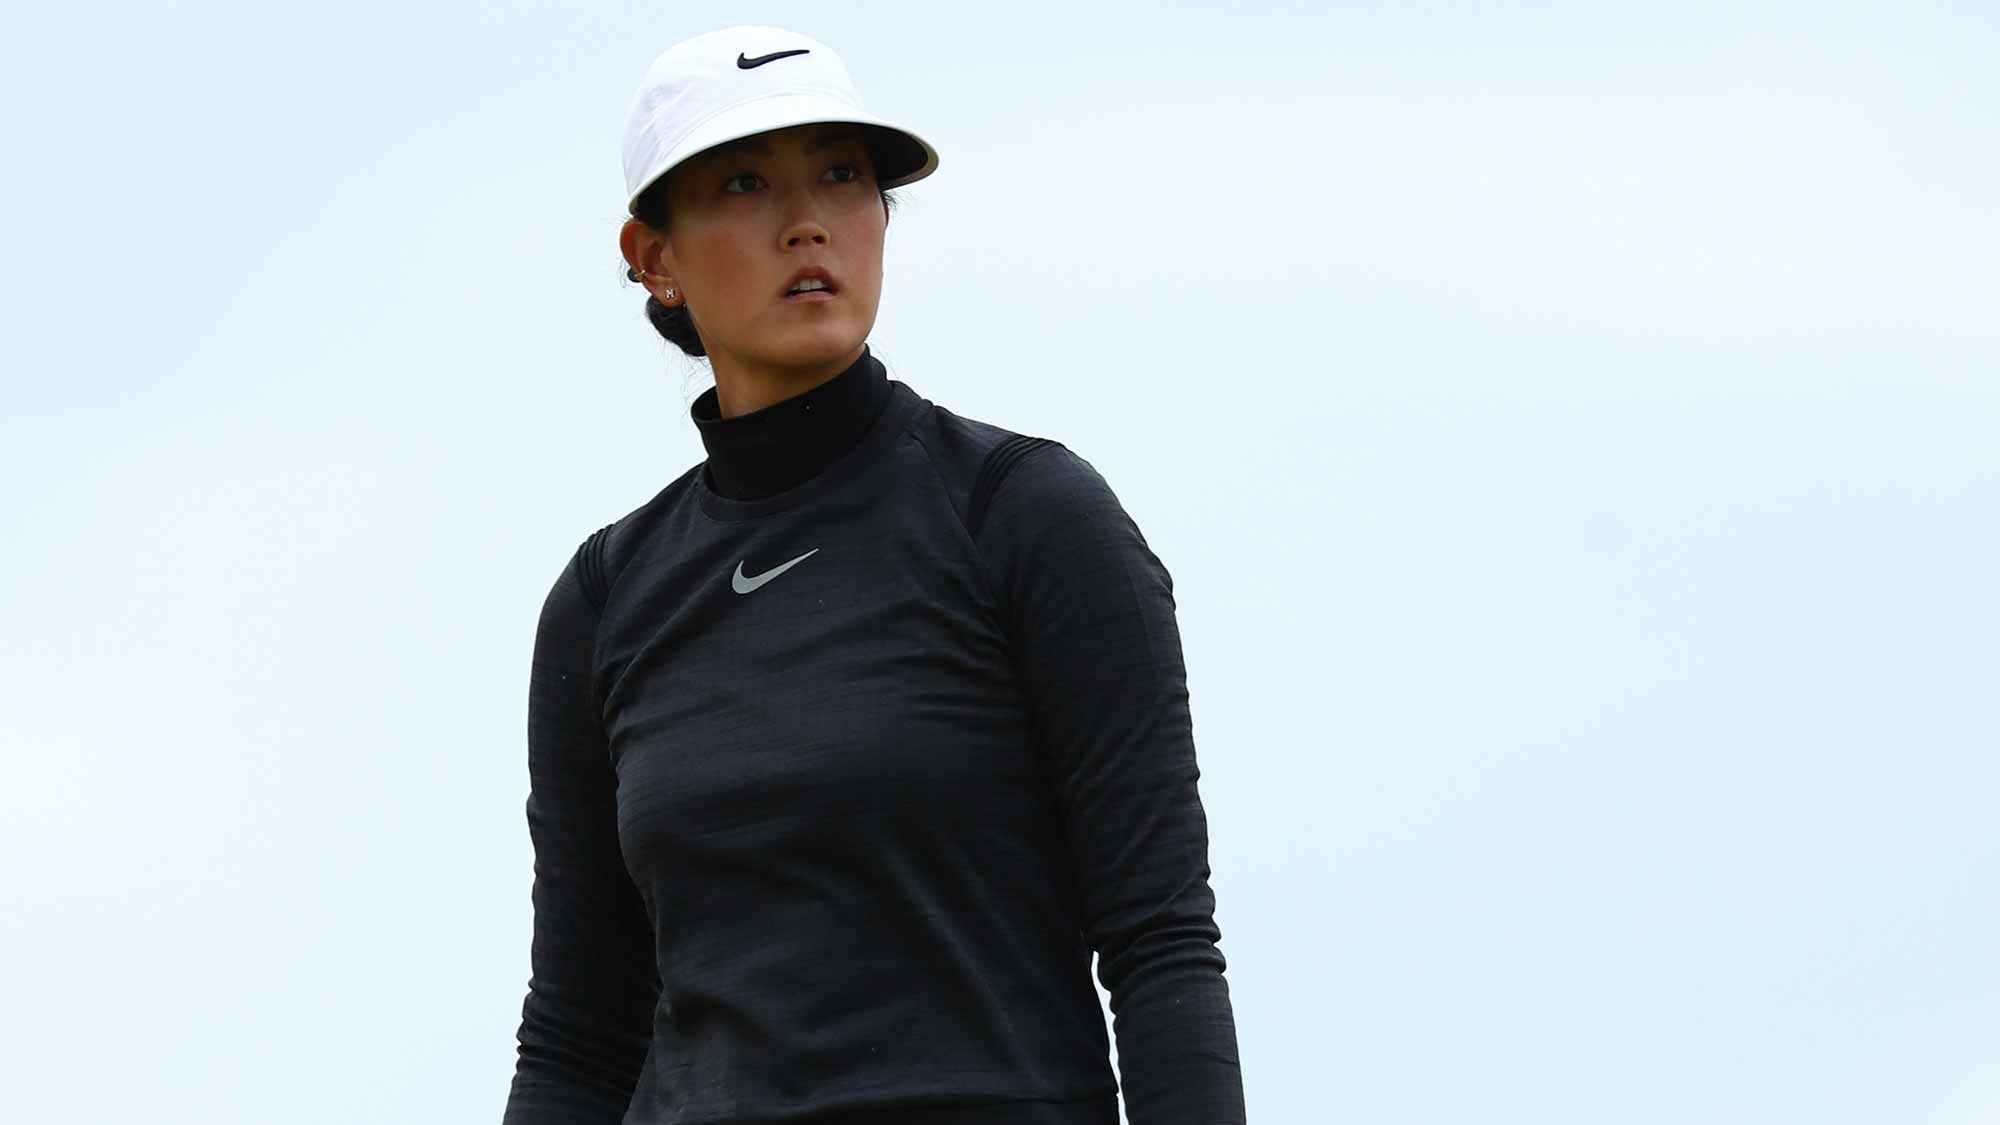 Michelle Wie of the United States looks down the 4th hole during the final round of the Ricoh Women's British Open at Kingsbarns Golf Links 